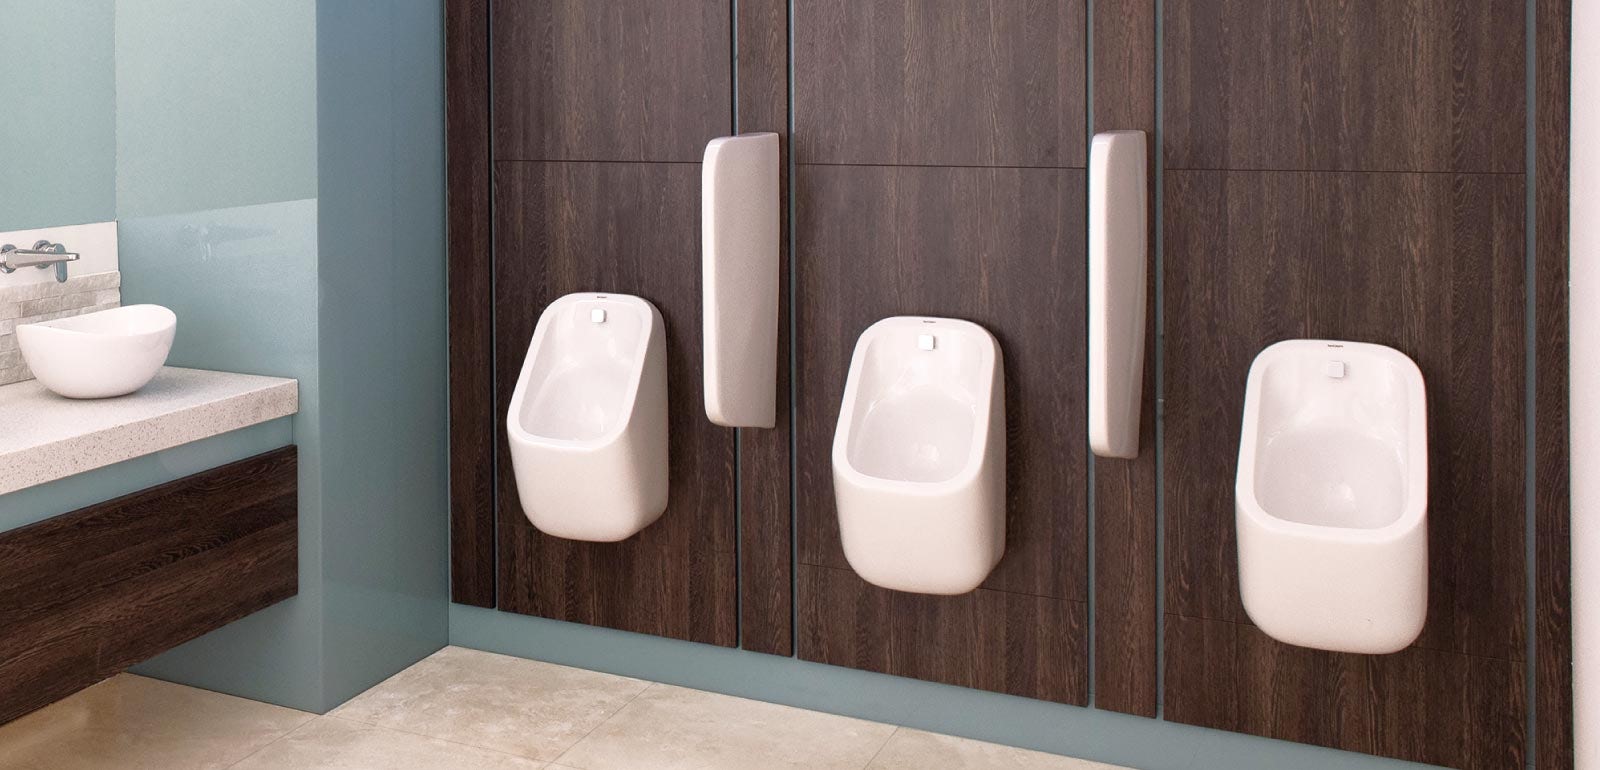 Urinals buying guide